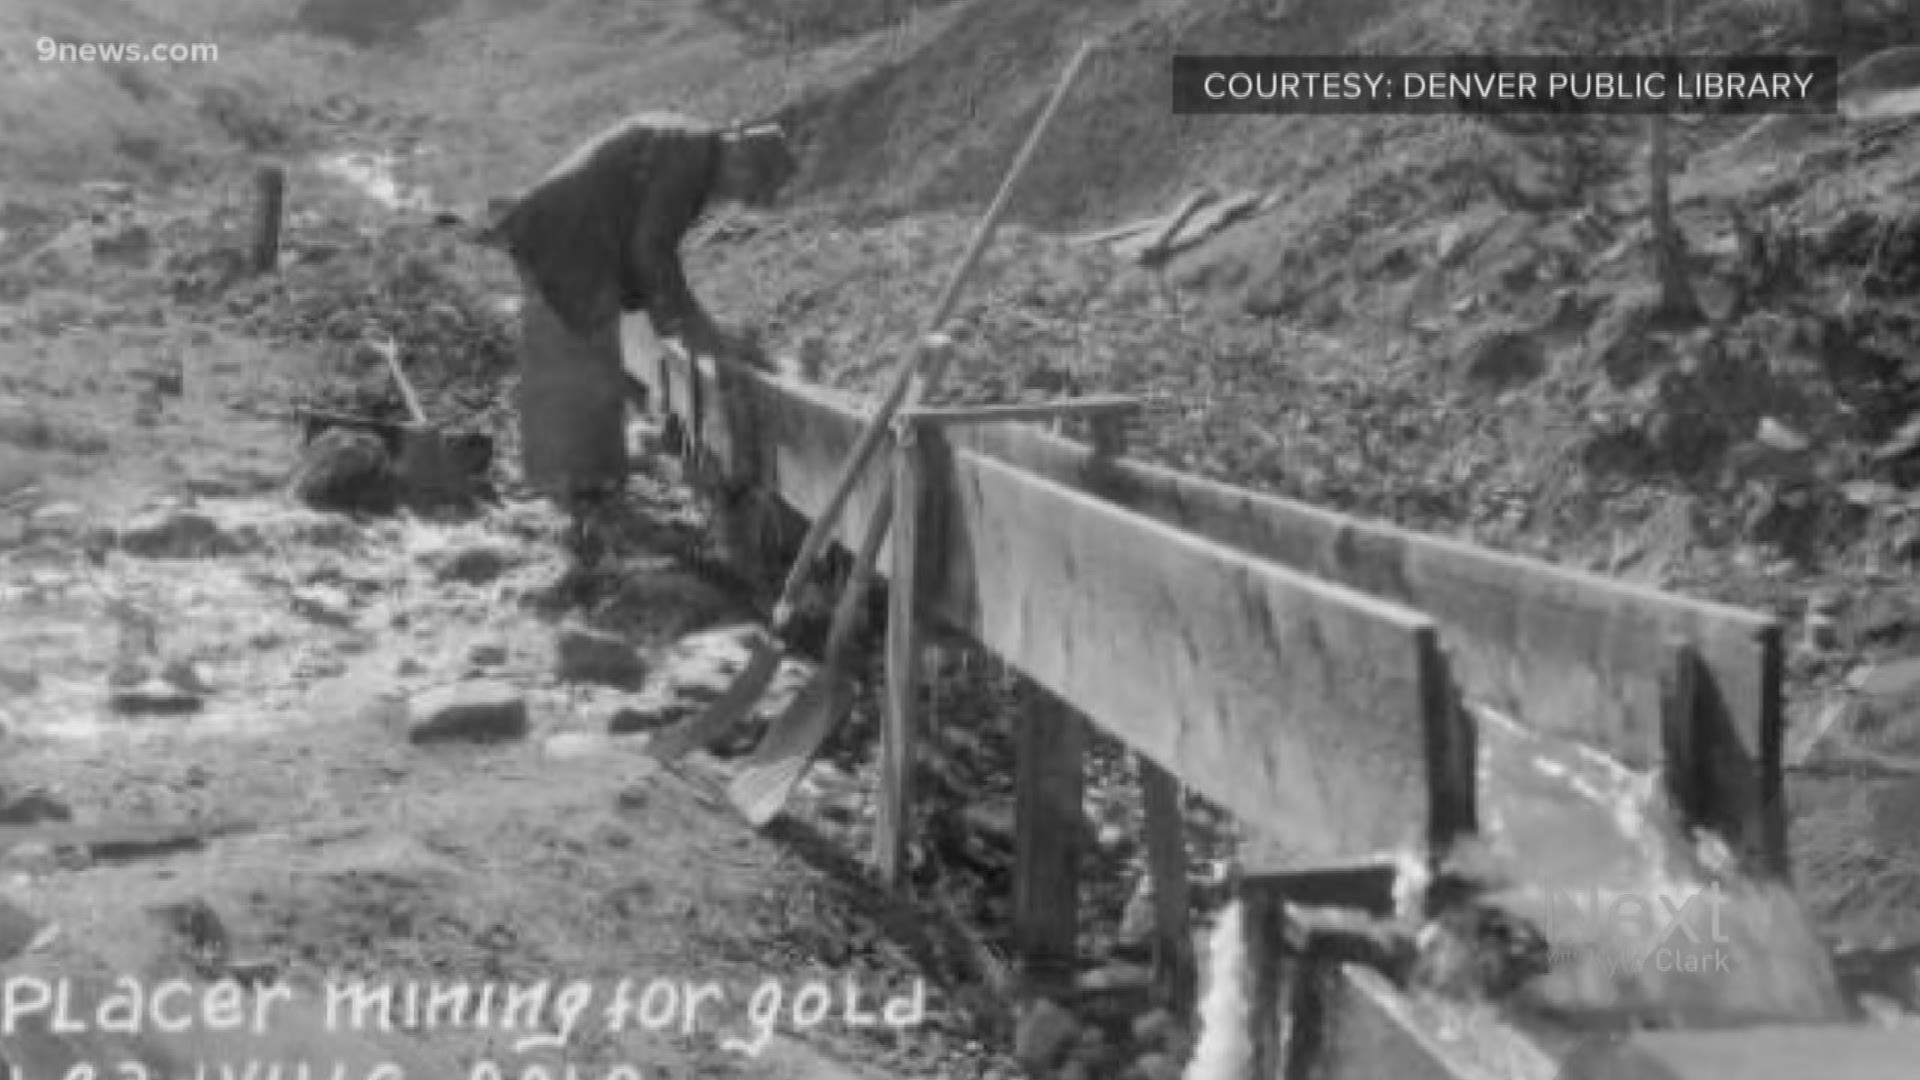 The gold rush is one of the most important events in Colorado's history. Without it, Colorado as we know it would not exist.